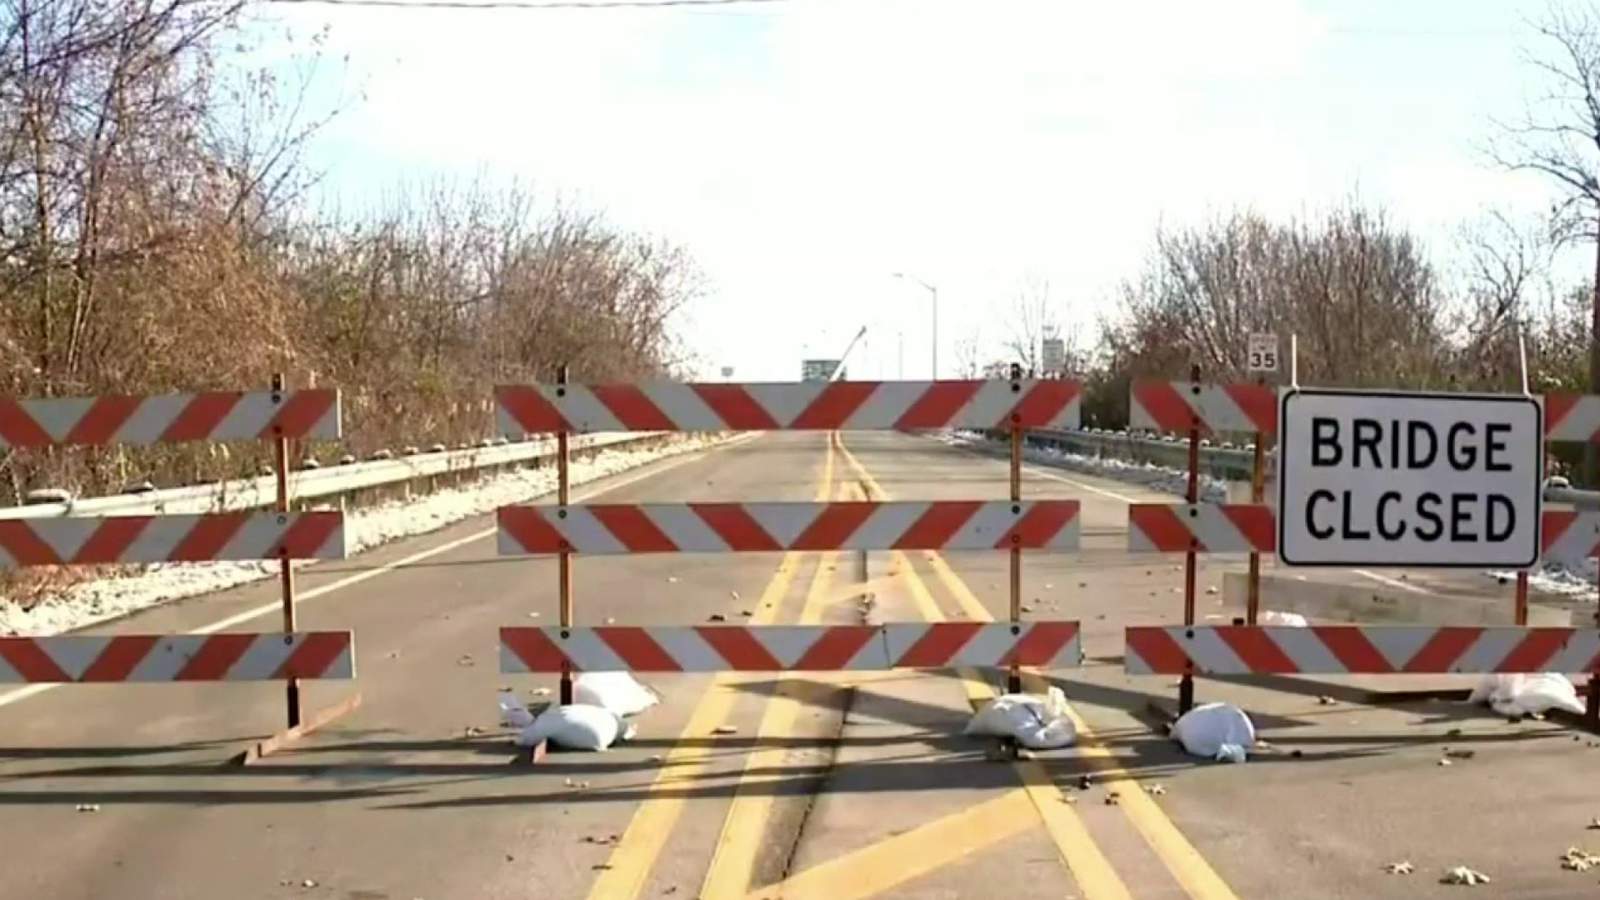 'Severe erosion’ to keep Grosse Ile Parkway Bridge closed until fall 2021, maybe later